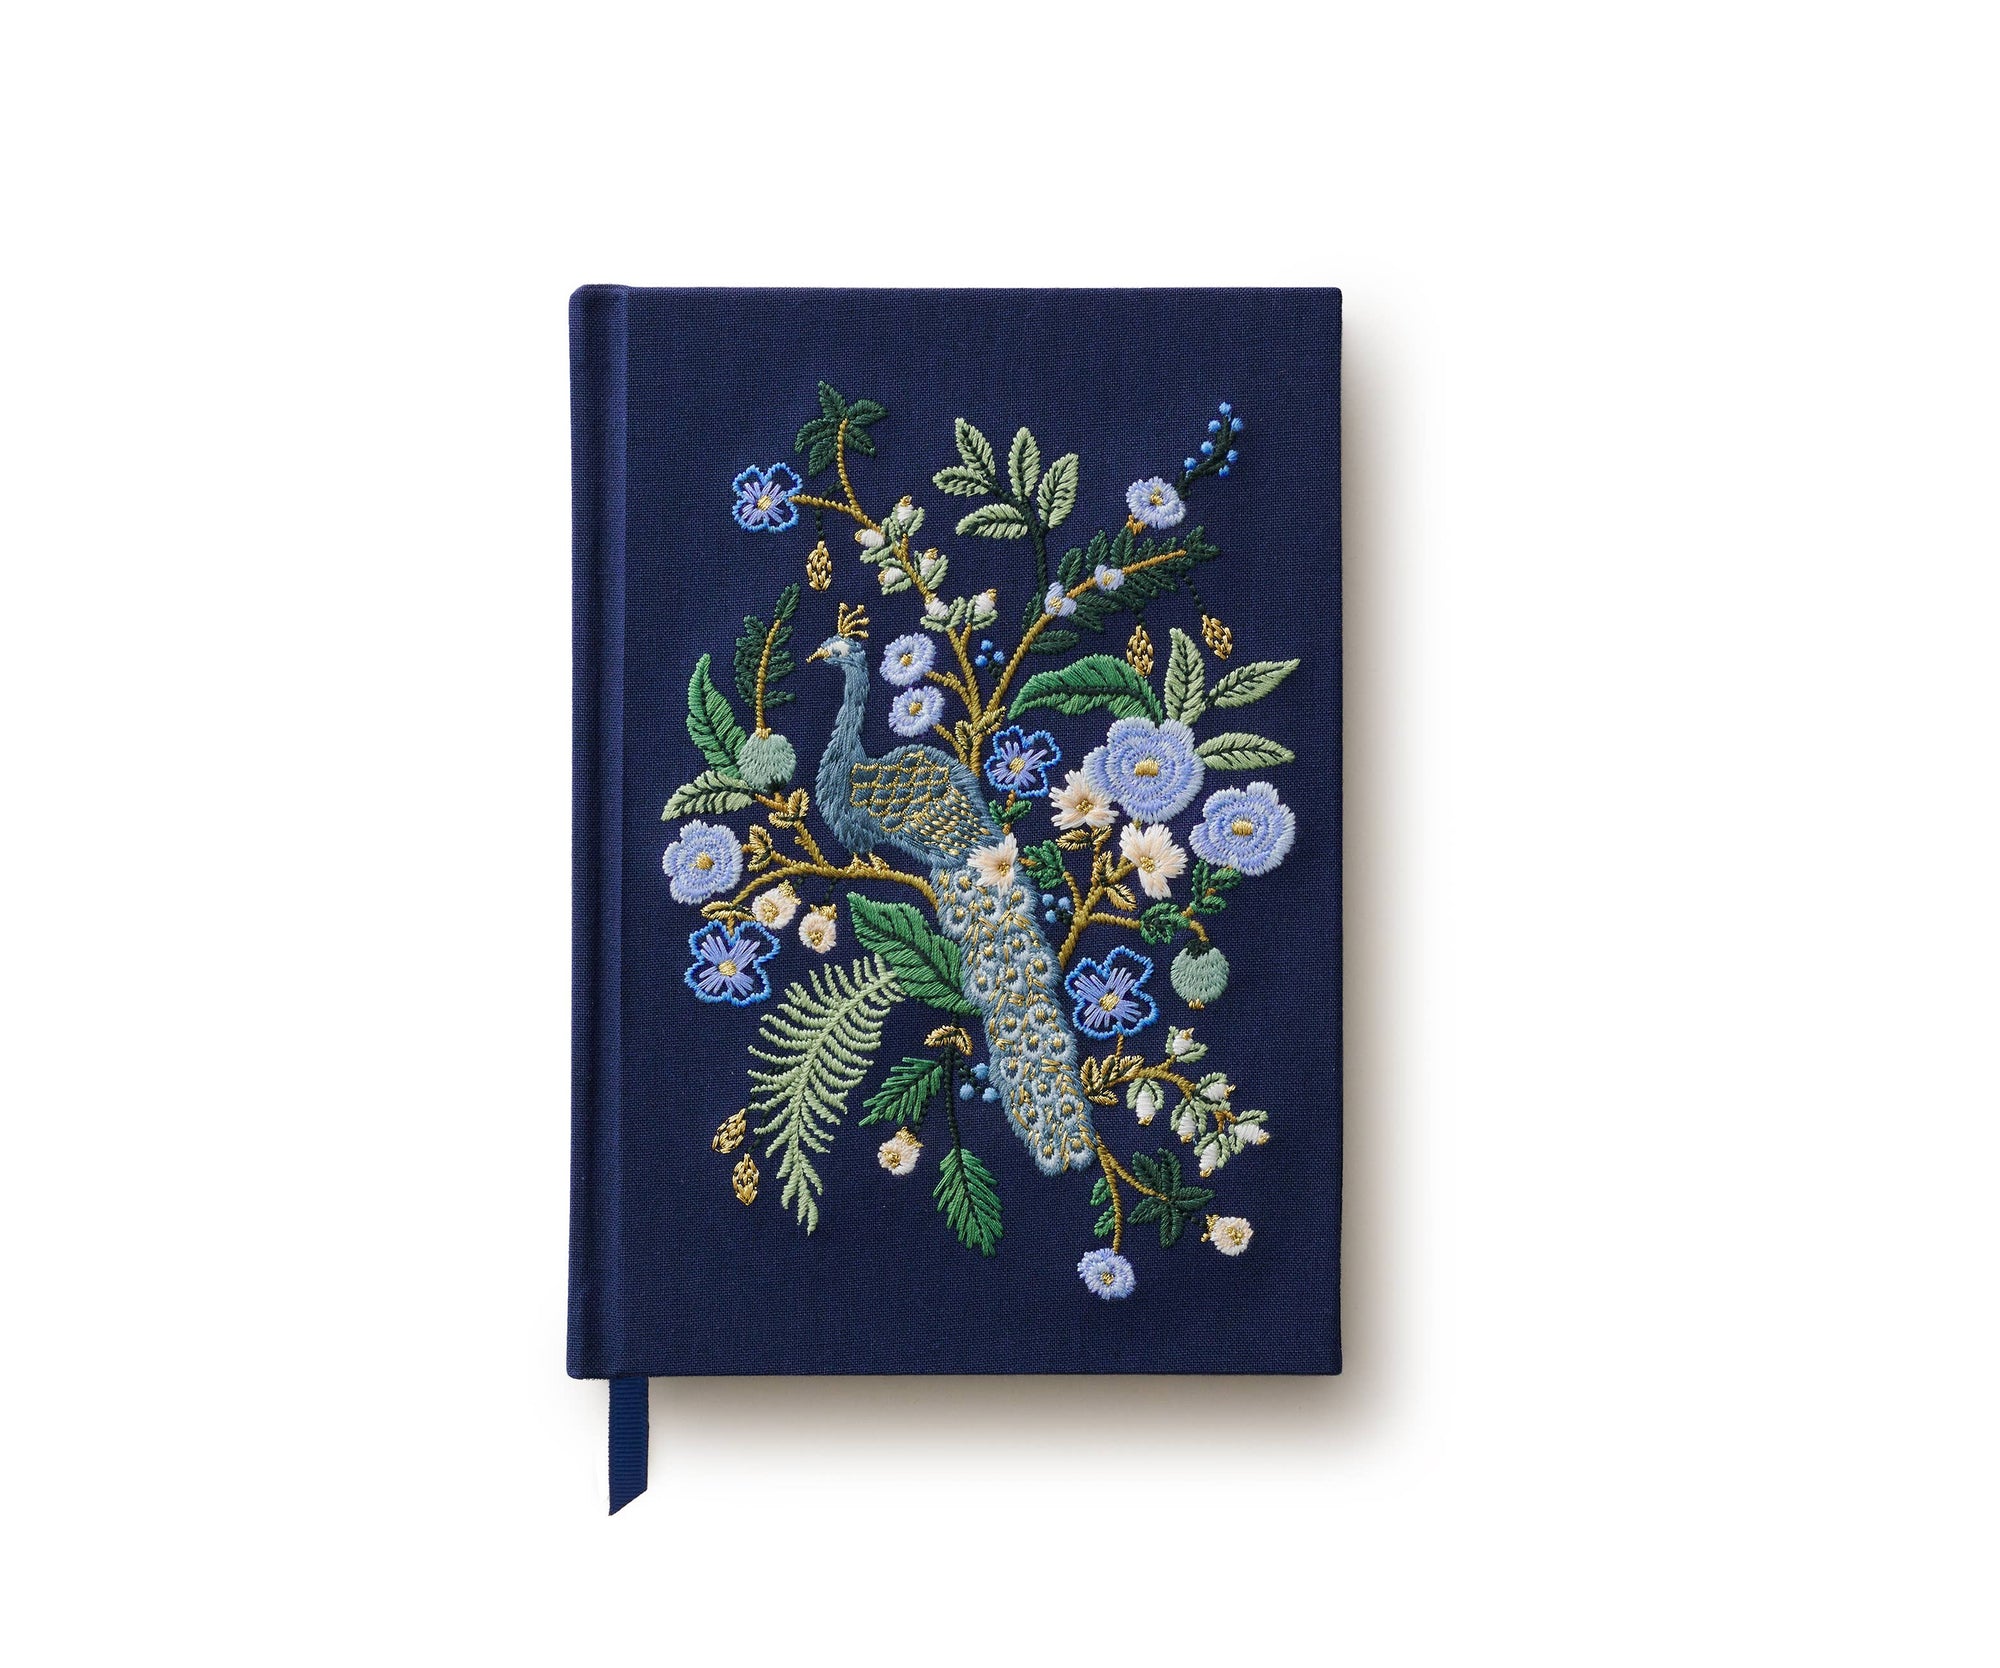 Peacock Embroidered Journal - The Preppy Bunny